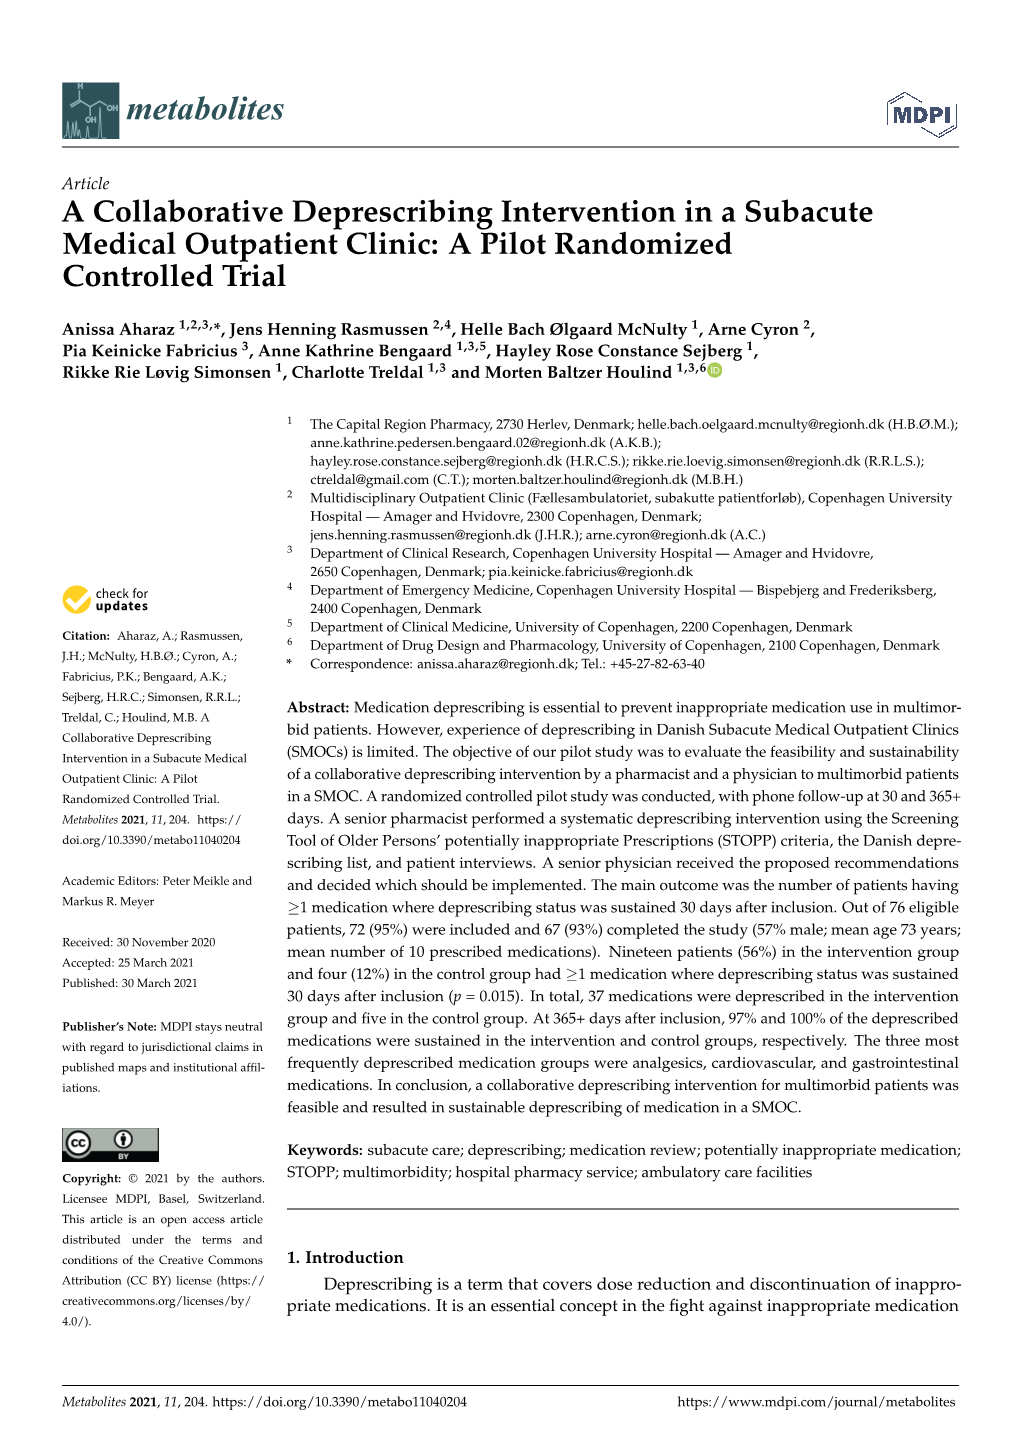 A Collaborative Deprescribing Intervention in a Subacute Medical Outpatient Clinic: a Pilot Randomized Controlled Trial